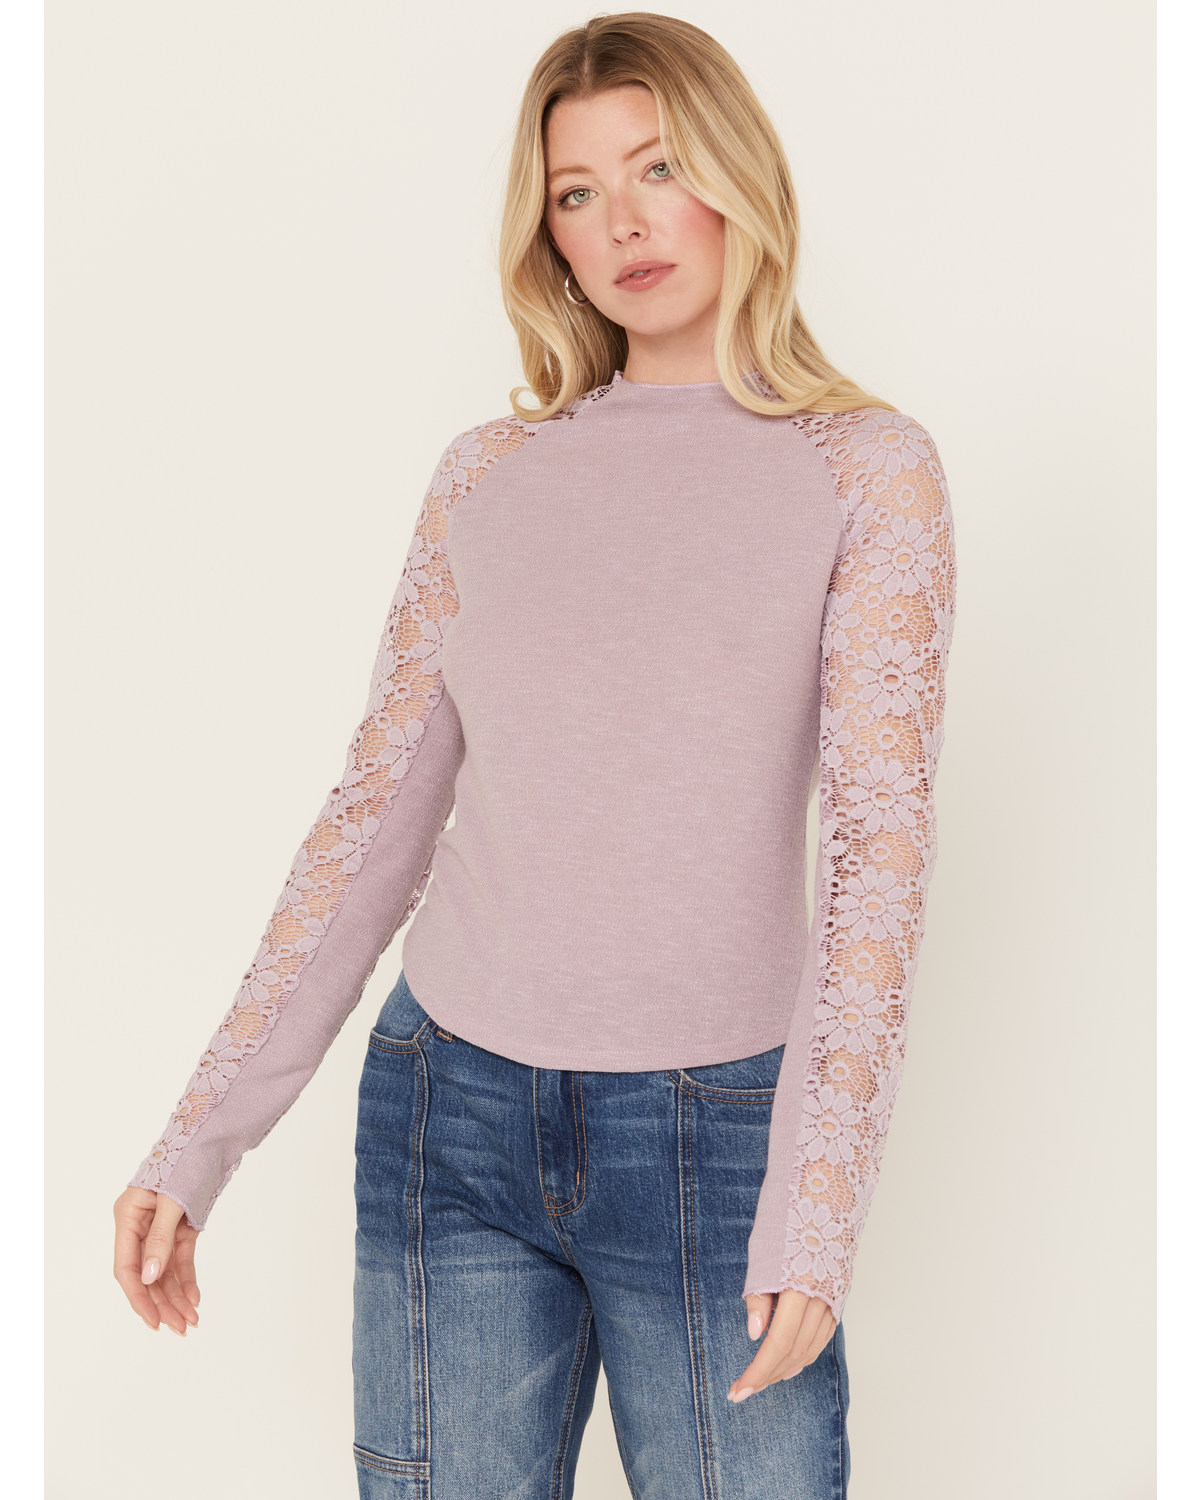 Wild Moss Women's Floral Lace Sleeve Mock Neck Top